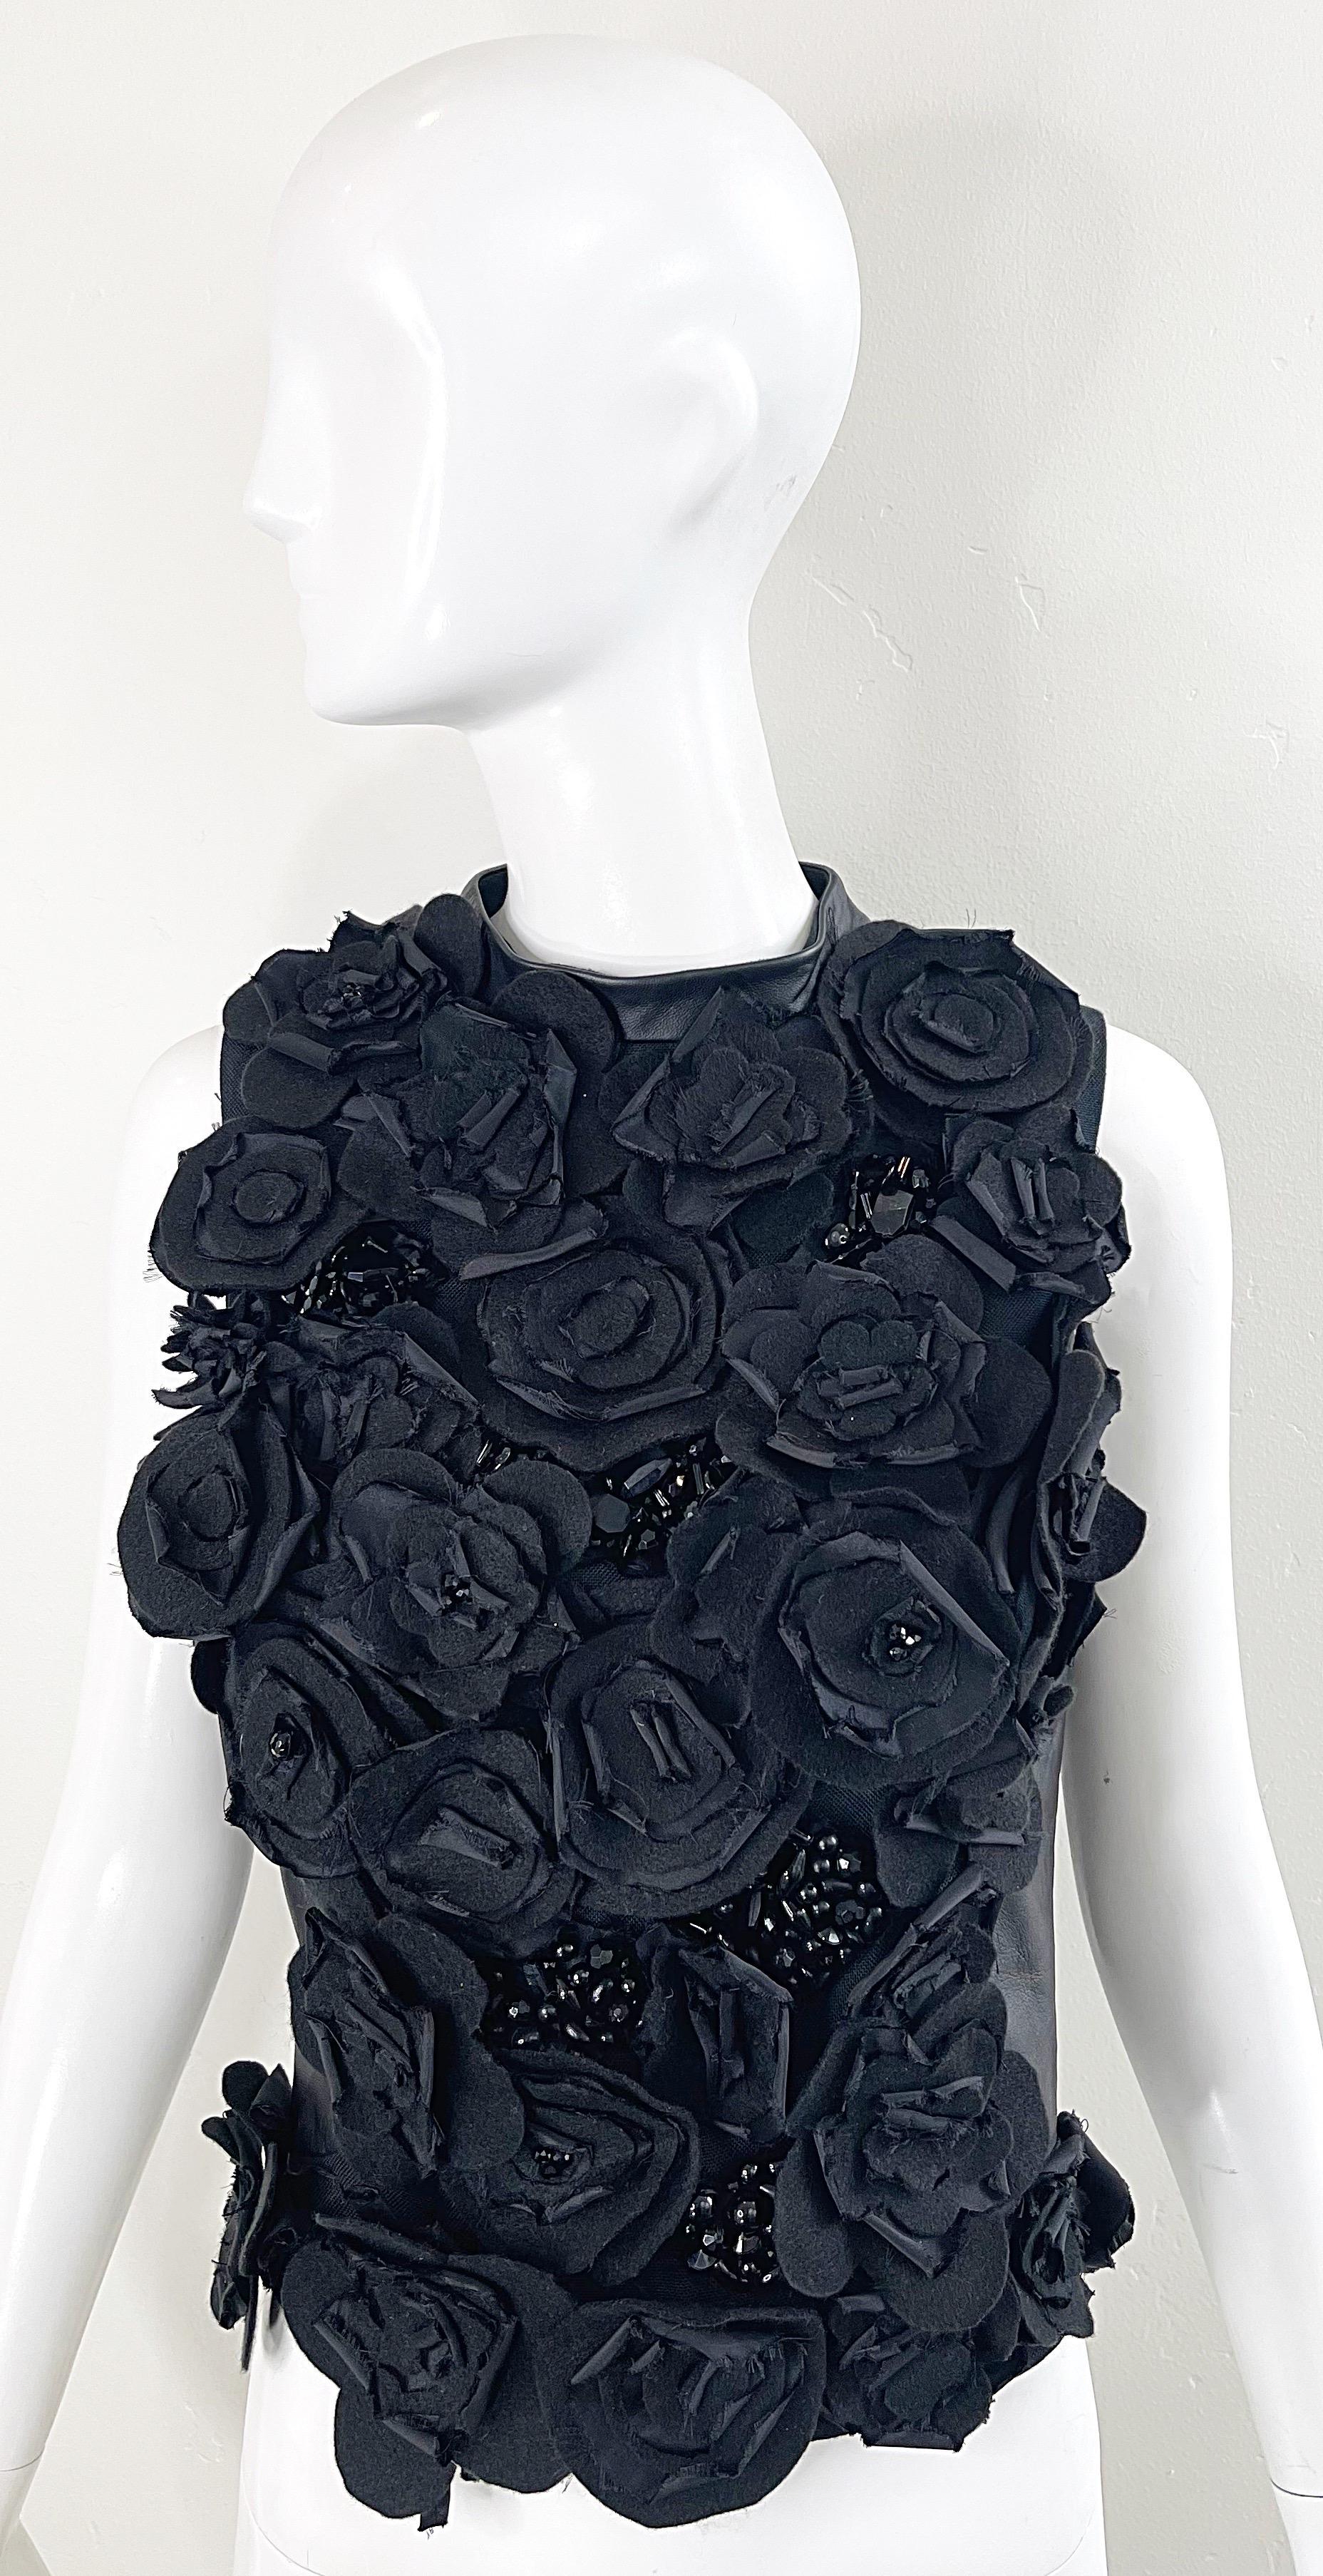 Amazing and rare 1990s GEMMA KAHNG black leather and silk flower appliqué beaded sleeveless top ! Features hundreds of hand-sewn felts flowers with black rhinestones and beads throughout. Leather back with full zip up the entire back. Can easily be